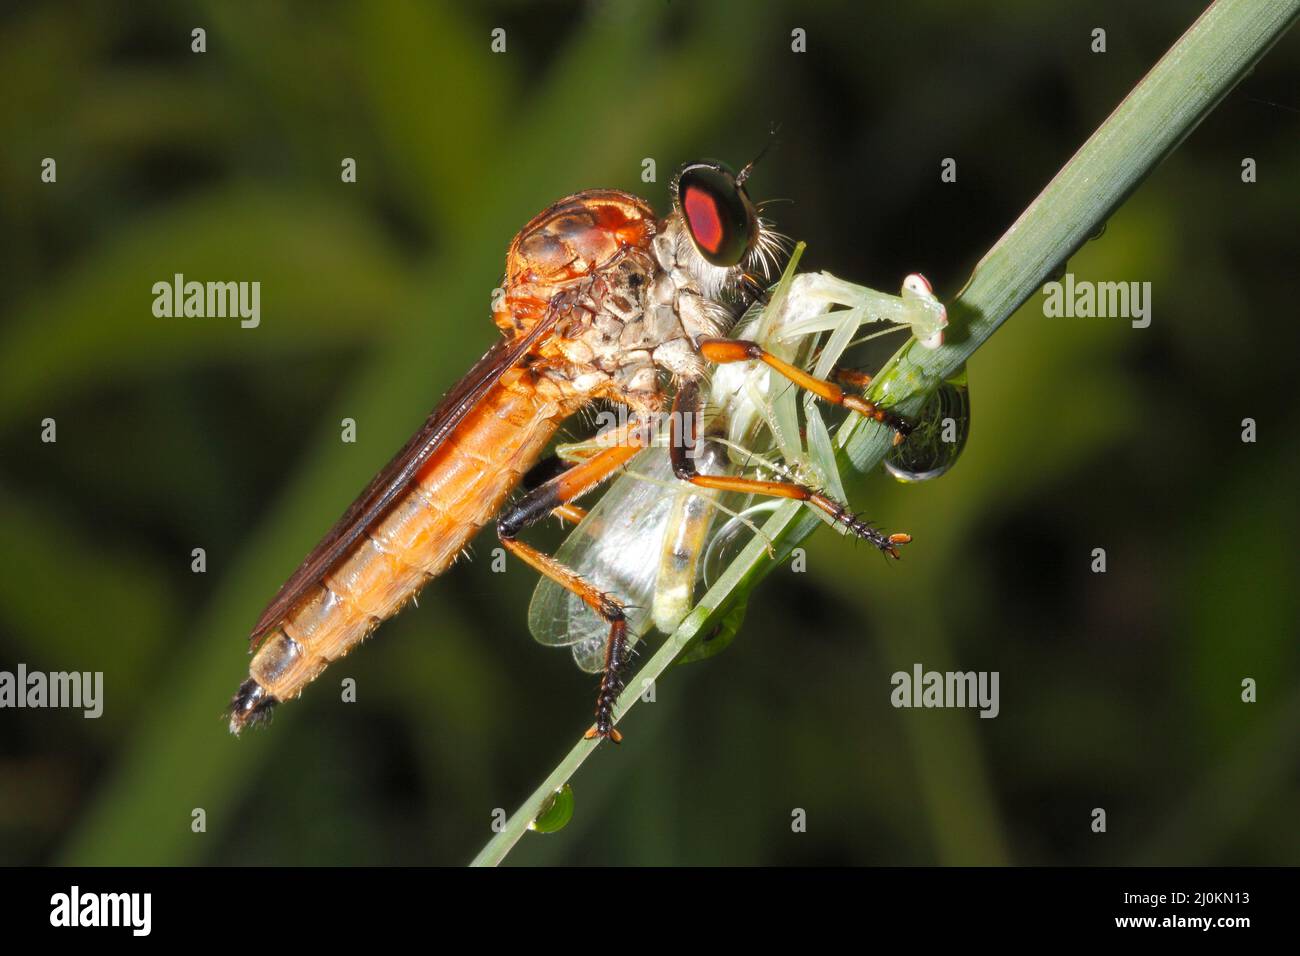 Robber Fly, Family Asilidae. Species unknown as most Robber Flies in this family look similar and difficult to accurately identify from a photograph. Stock Photo